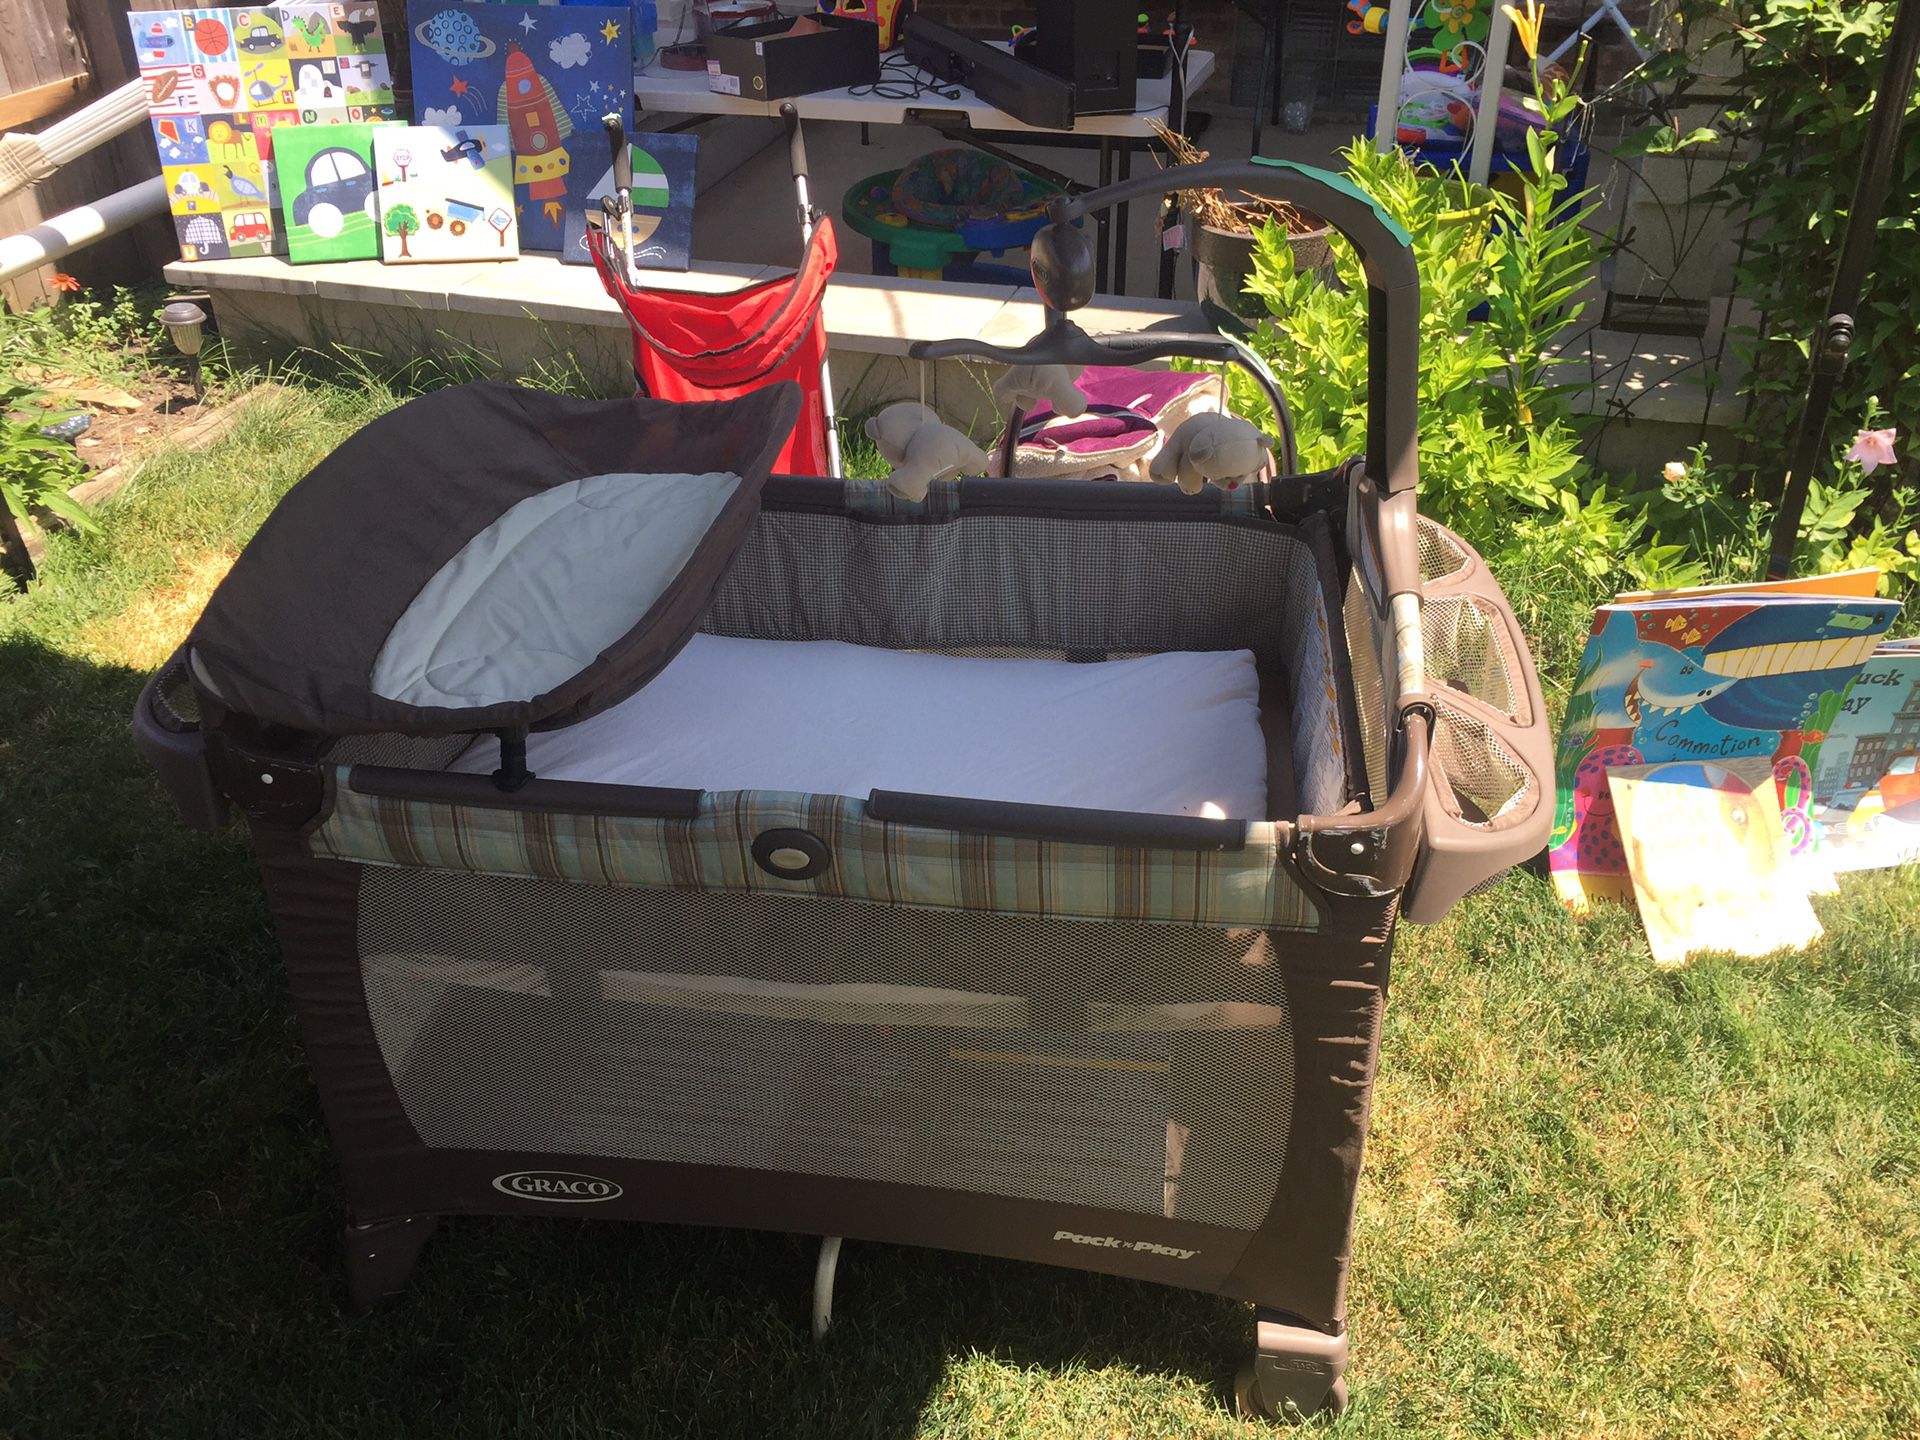 Changing table/Sleeper/Play pen for infant/toddler and changing table